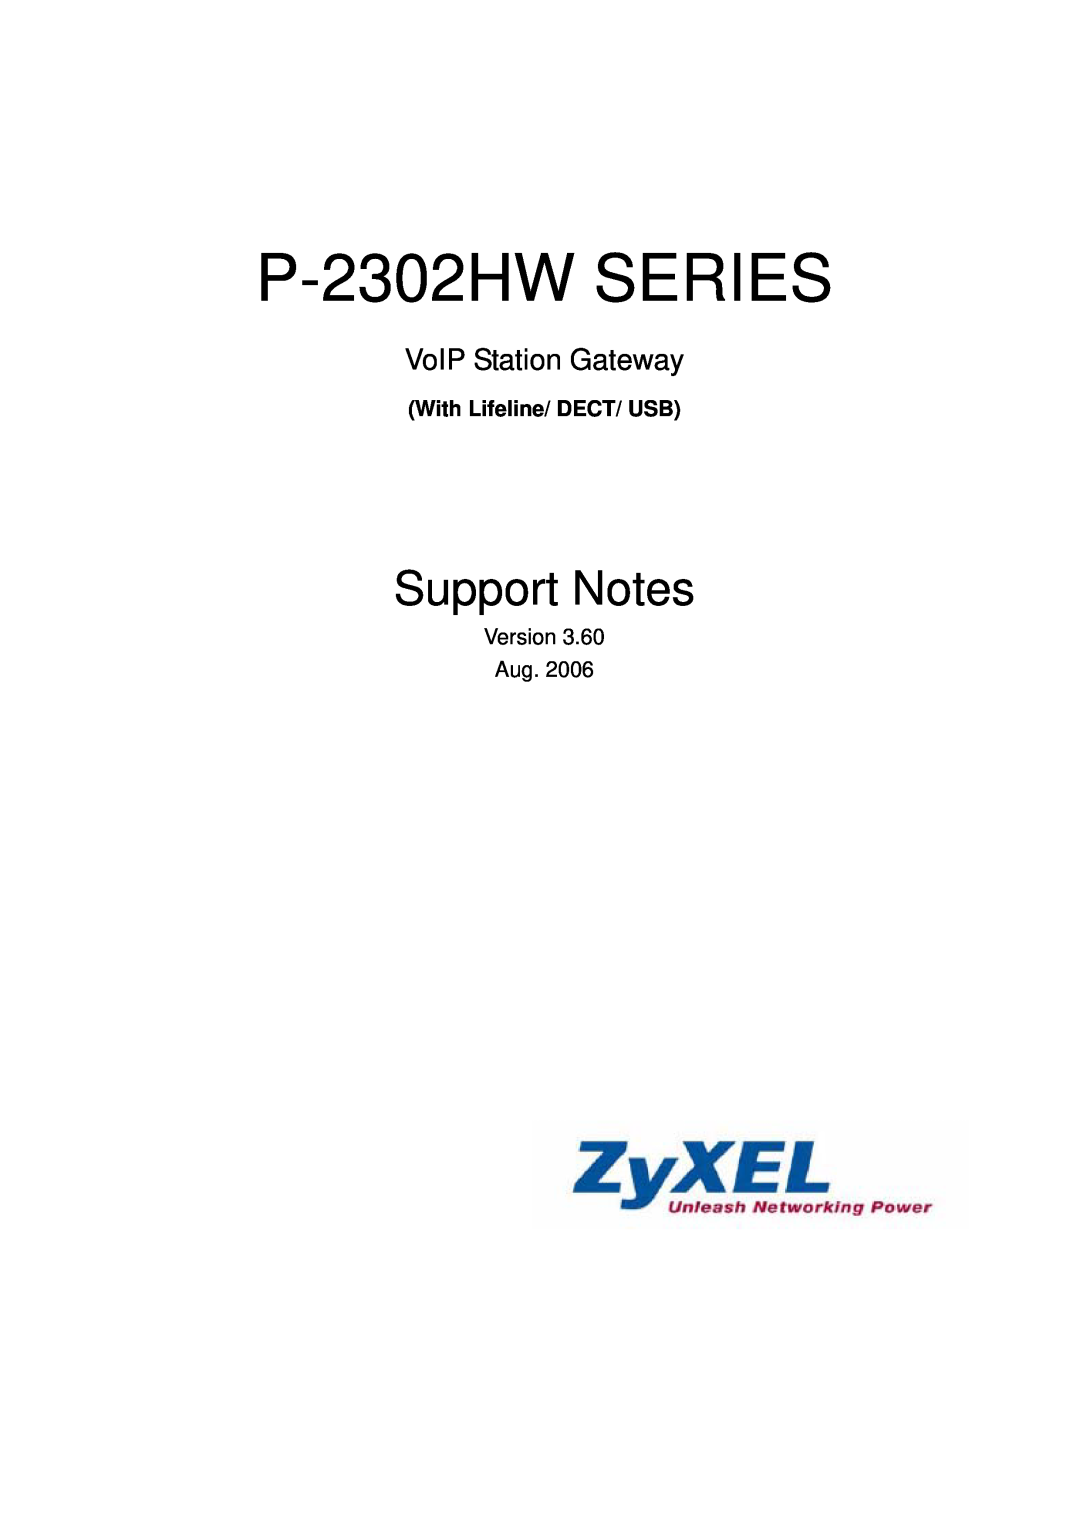 ZyXEL Communications manual With Lifeline/ DECT/ USB, P-2302HW SERIES, Support Notes, VoIP Station Gateway 